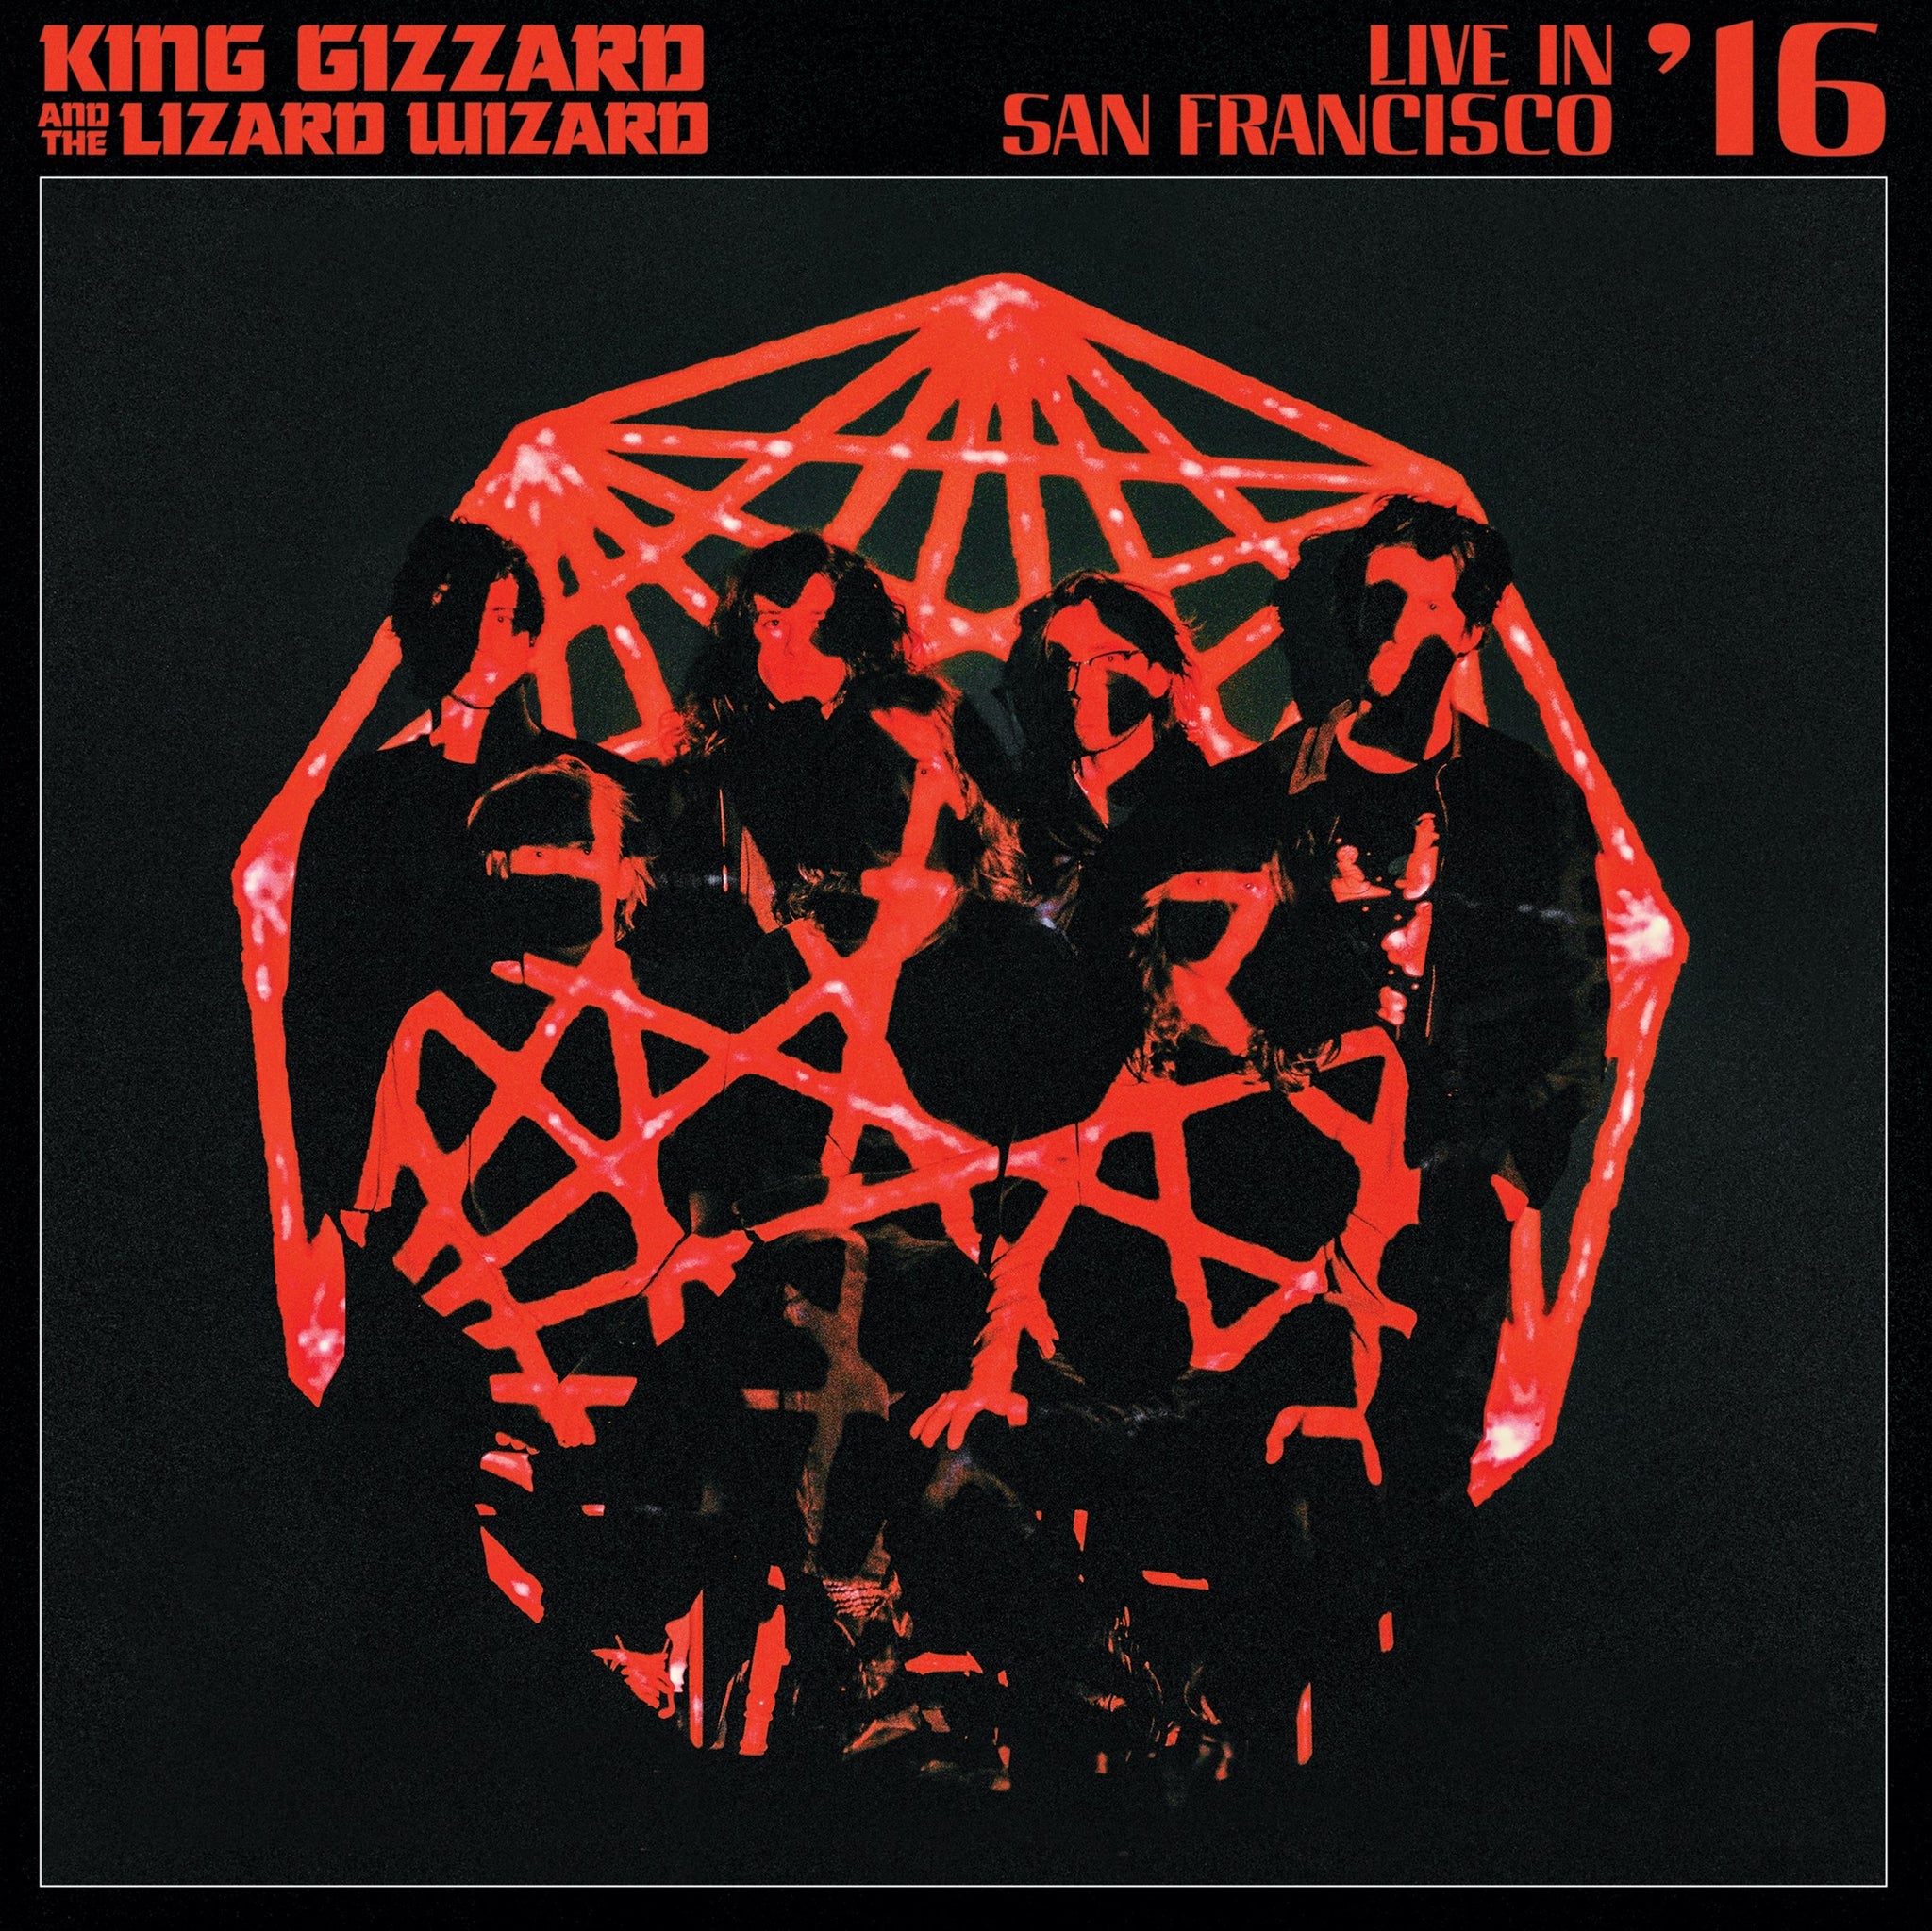 KING GIZZARD AND THE LIZARD WIZARD - LIVE IN SAN FRANCISCO '16 - 2LP COLOURED VINYL - Wah Wah Records